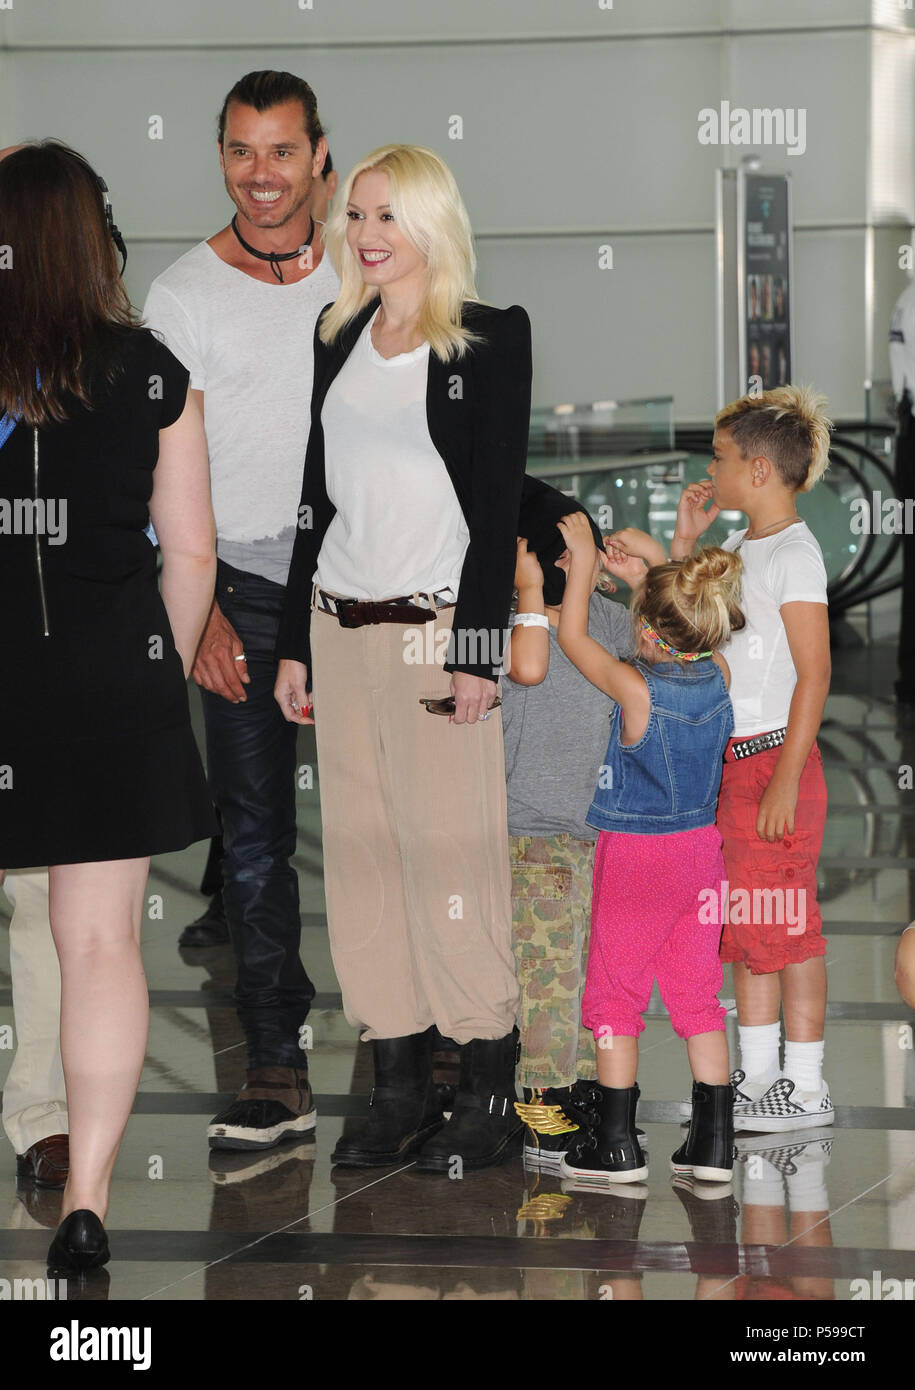 Gwen Stefani, Gavin Rossdale,  Kids Zuma, Kingston and Niece Stella Stefani  arriving the 2013 A Time For Heroes at Century Park In Los Angeles. Elizabeth Glaser Pedriatic Aids Foundation Gwen Stefani, Gavin Rossdale,  Kids Zuma, Kingston and Niece Stella Stefani 107 ------------- Red Carpet Event, Vertical, USA, Film Industry, Celebrities,  Photography, Bestof, Arts Culture and Entertainment, Topix Celebrities fashion /  Vertical, Best of, Event in Hollywood Life - California,  Red Carpet and backstage, USA, Film Industry, Celebrities,  movie celebrities, TV celebrities, Music celebrities, Ph Stock Photo